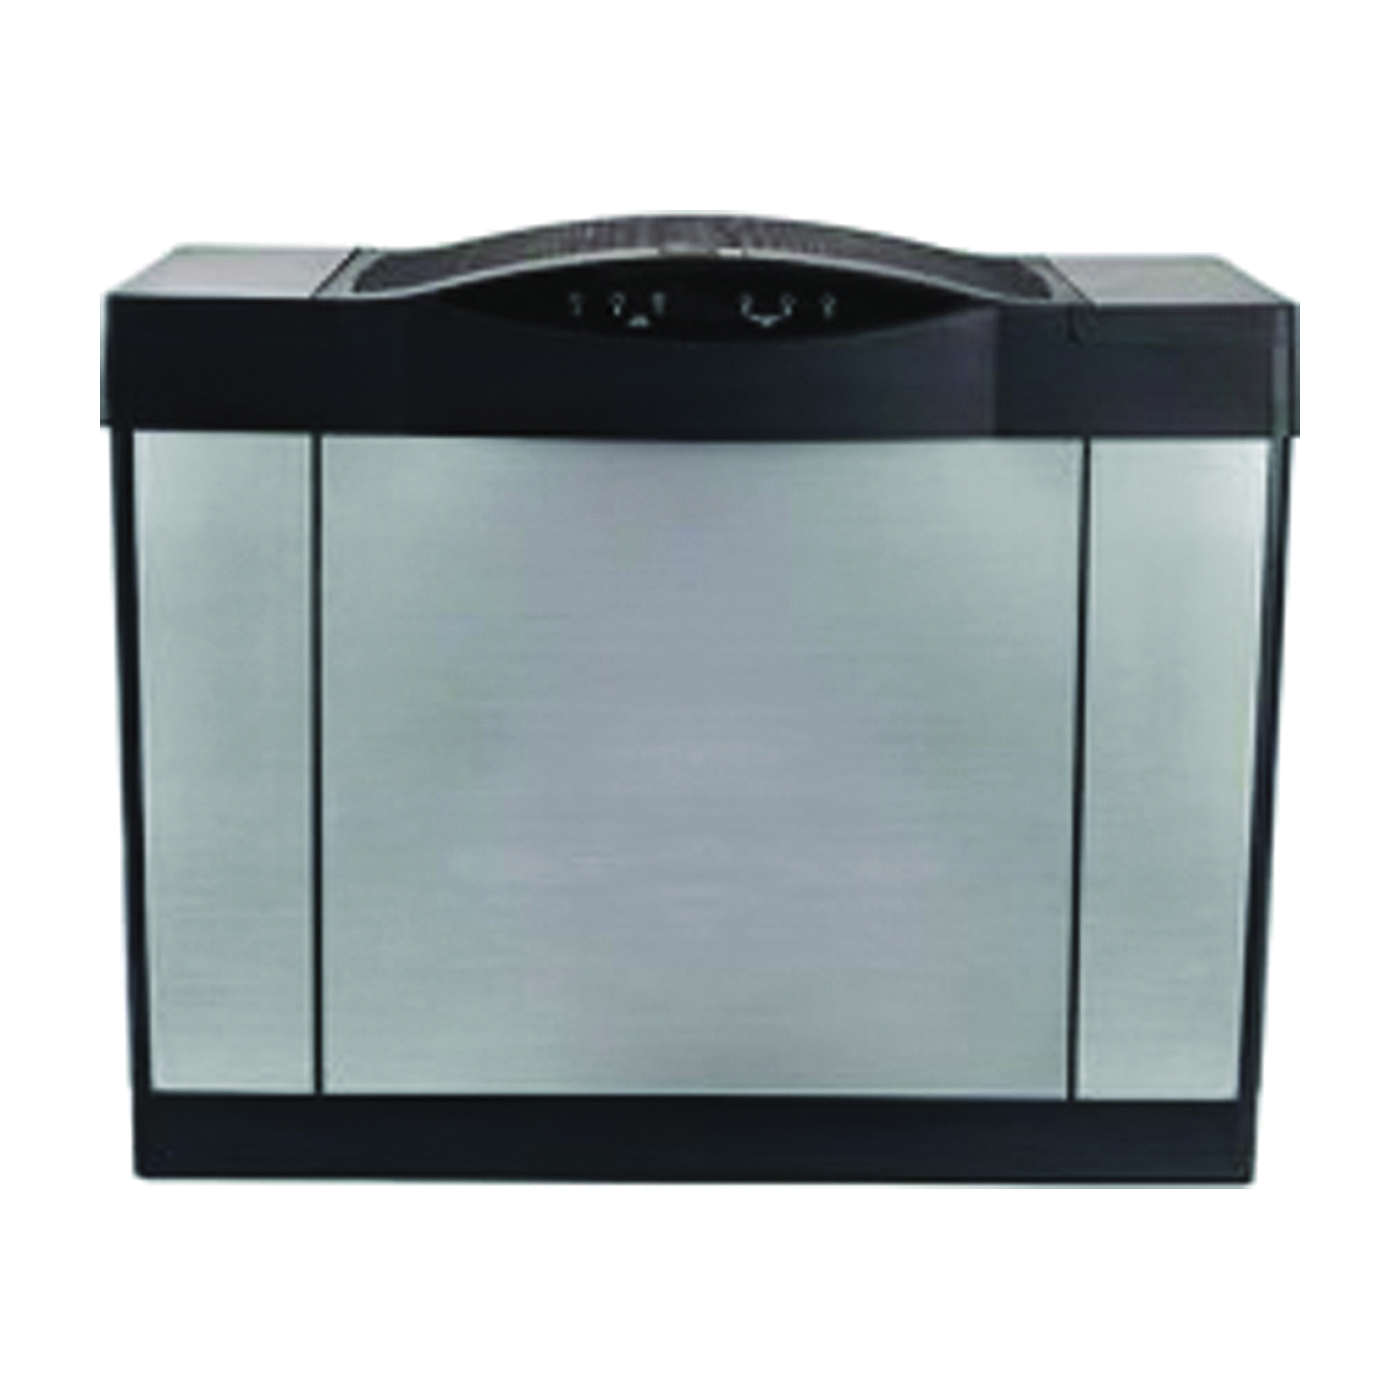 4DTS 900 Evaporative Humidifier, 2 A, 120 V, 135 W, 9-Speed, 2600 sq-ft Coverage Area, 5.7 gal Tank